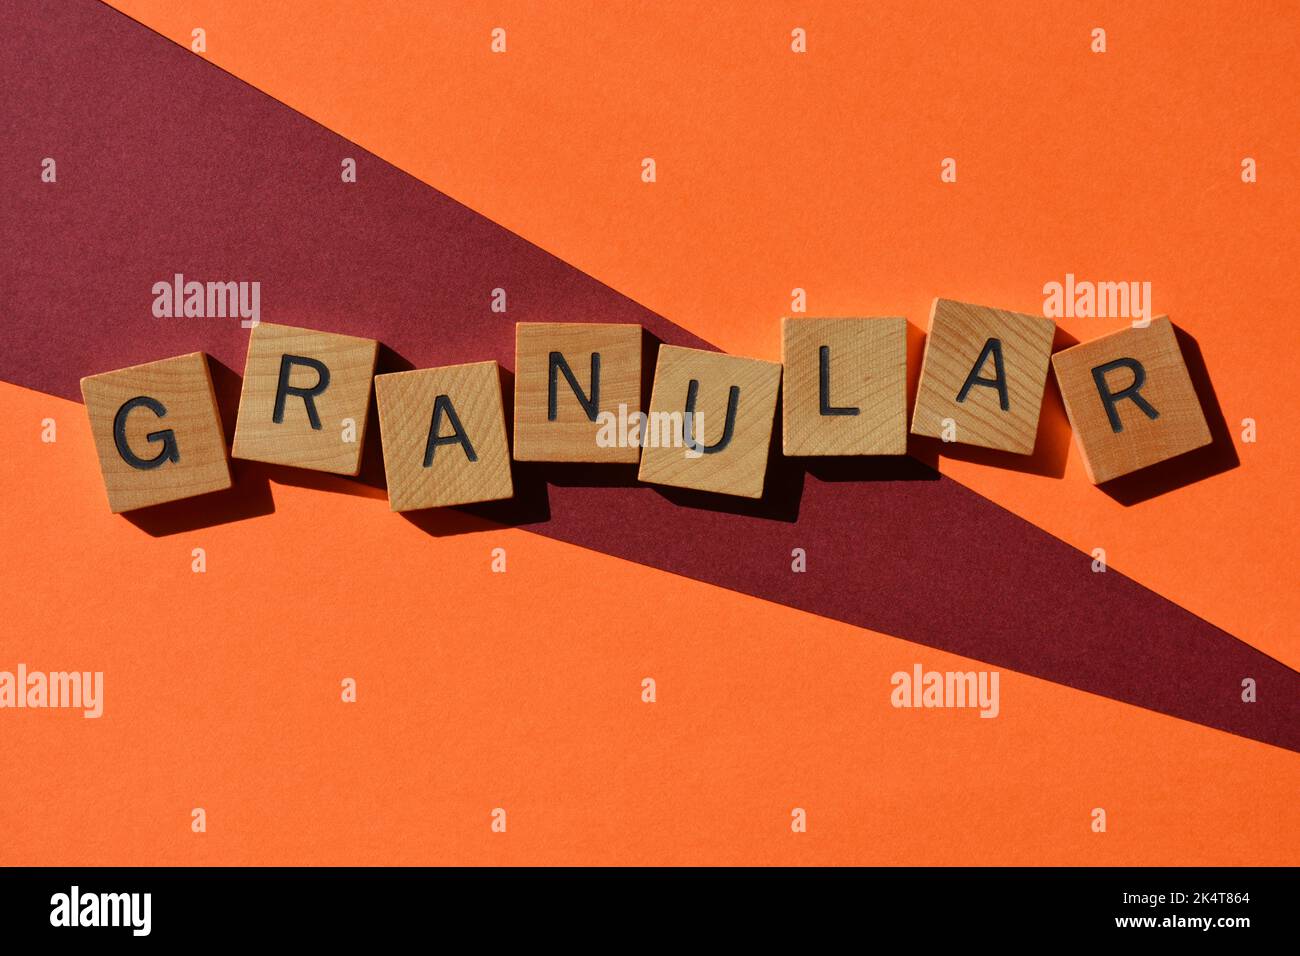 Granular, word inn wooden alphabet letters, business jargon meaning all about the details, as in how the smaller issues make the bigger picture Stock Photo